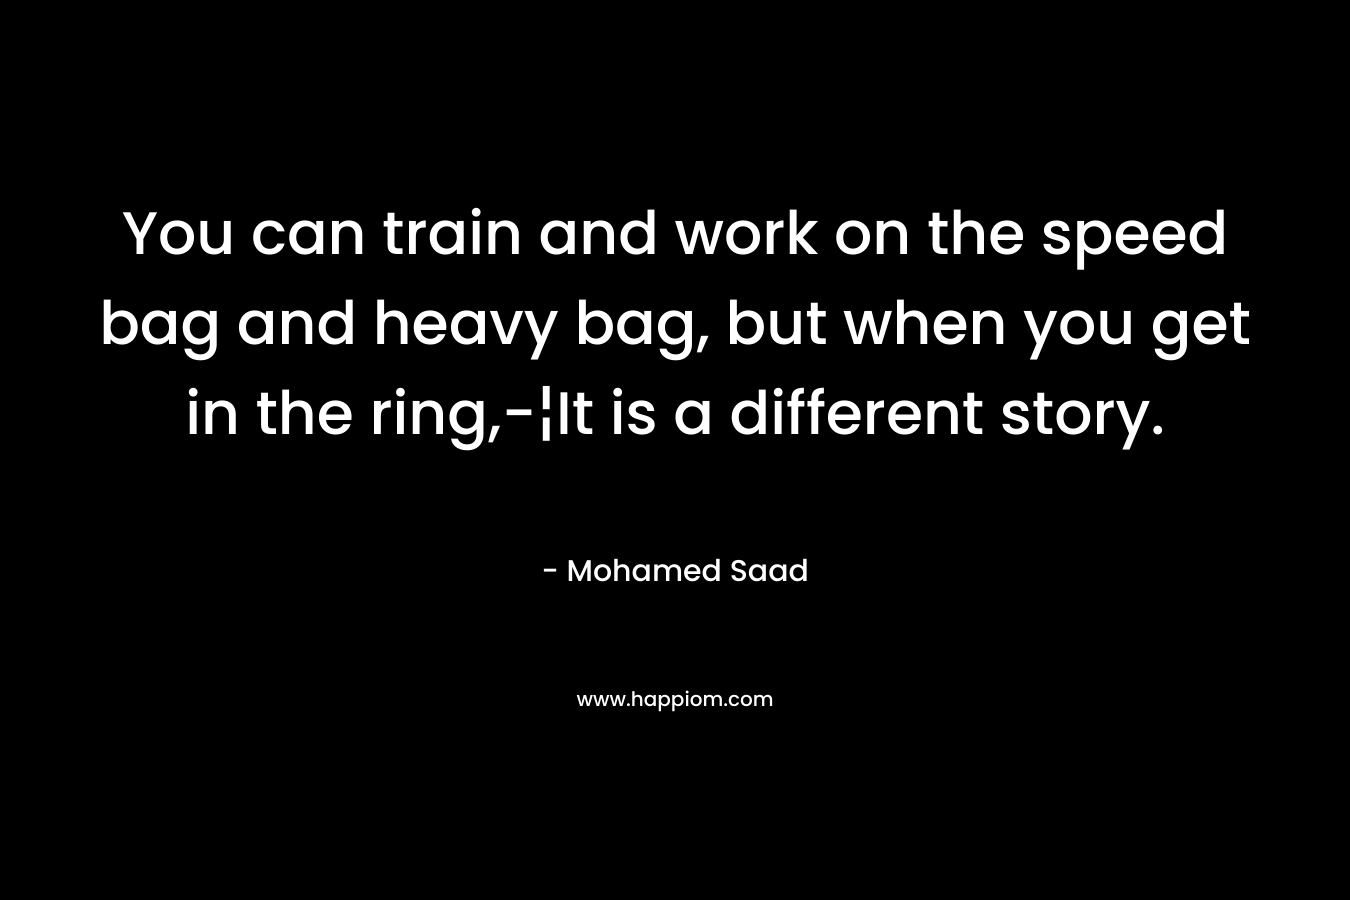 You can train and work on the speed bag and heavy bag, but when you get in the ring,-¦It is a different story.